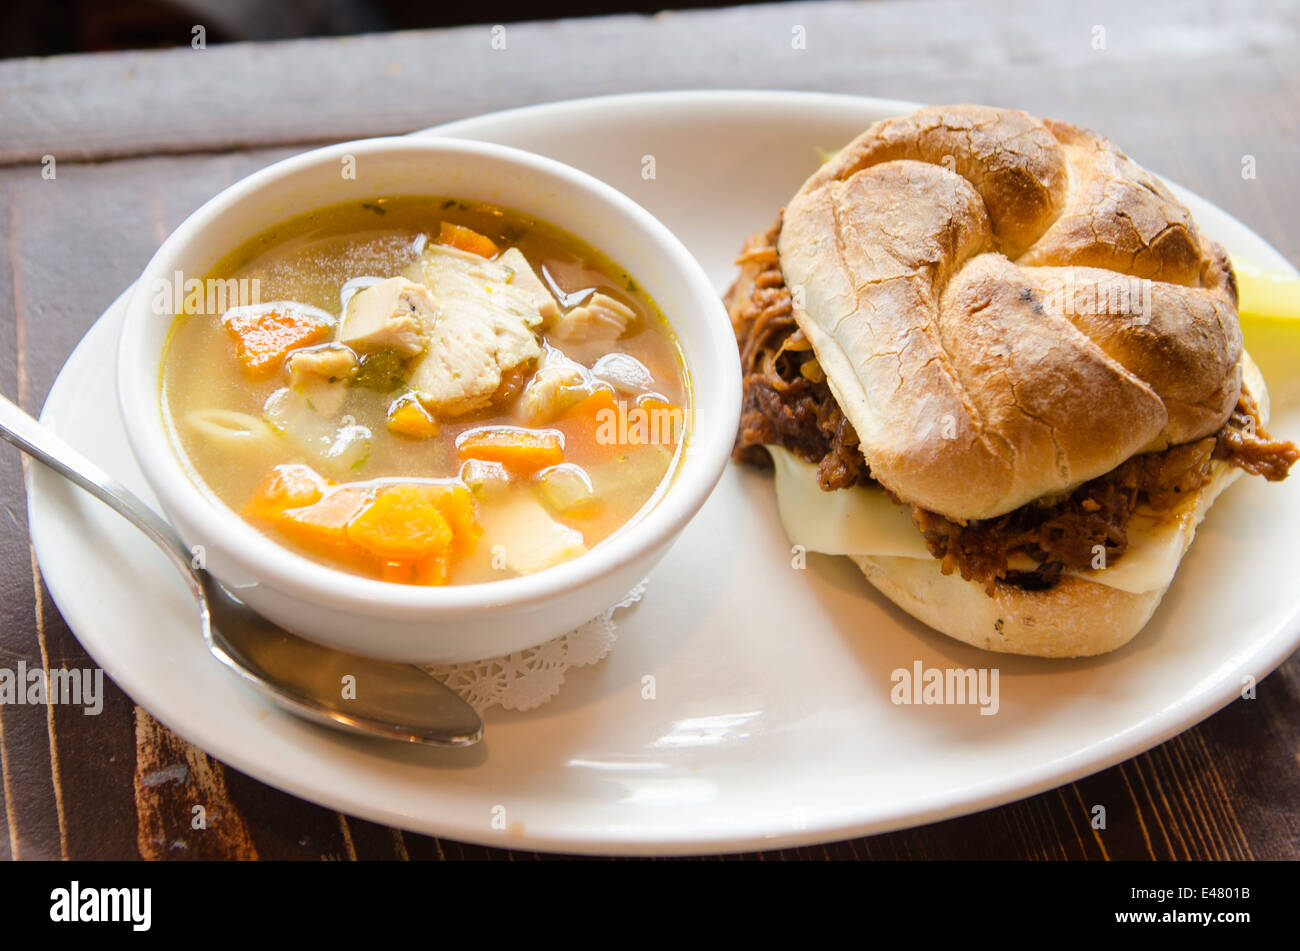 Pulled pork sandwich and vegetable soup, Nancy O's Restaurant, Prince George, British Columbia, Canada. Stock Photo